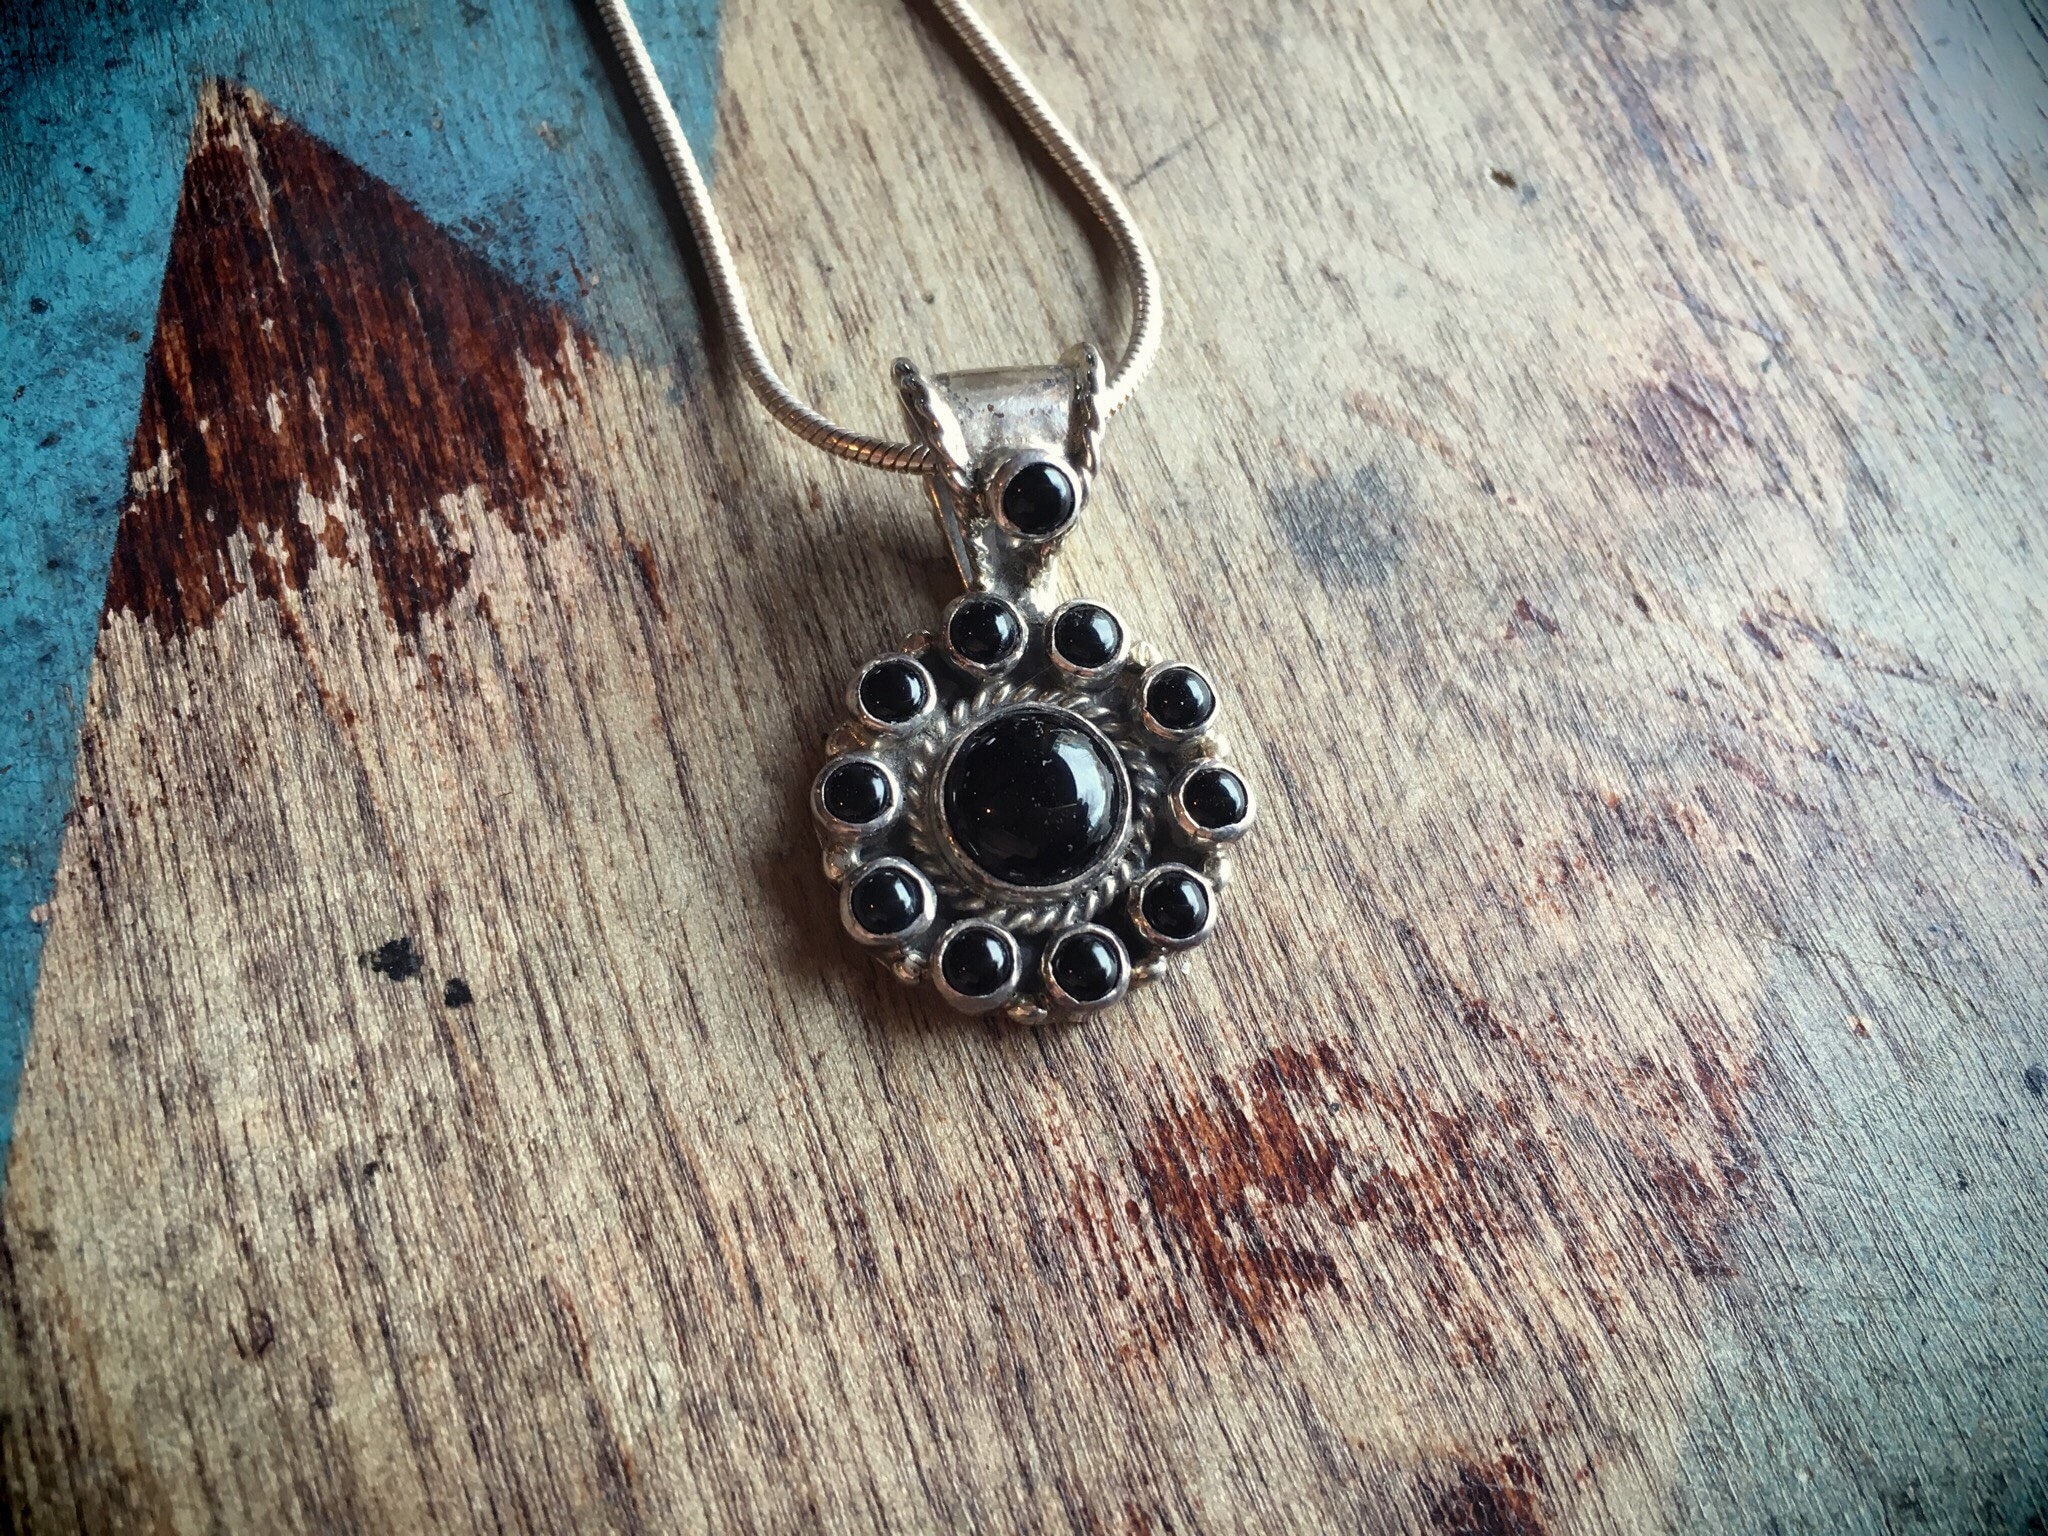 Black Onyx Pendant Sterling Silver Necklace, Native American Indian ...